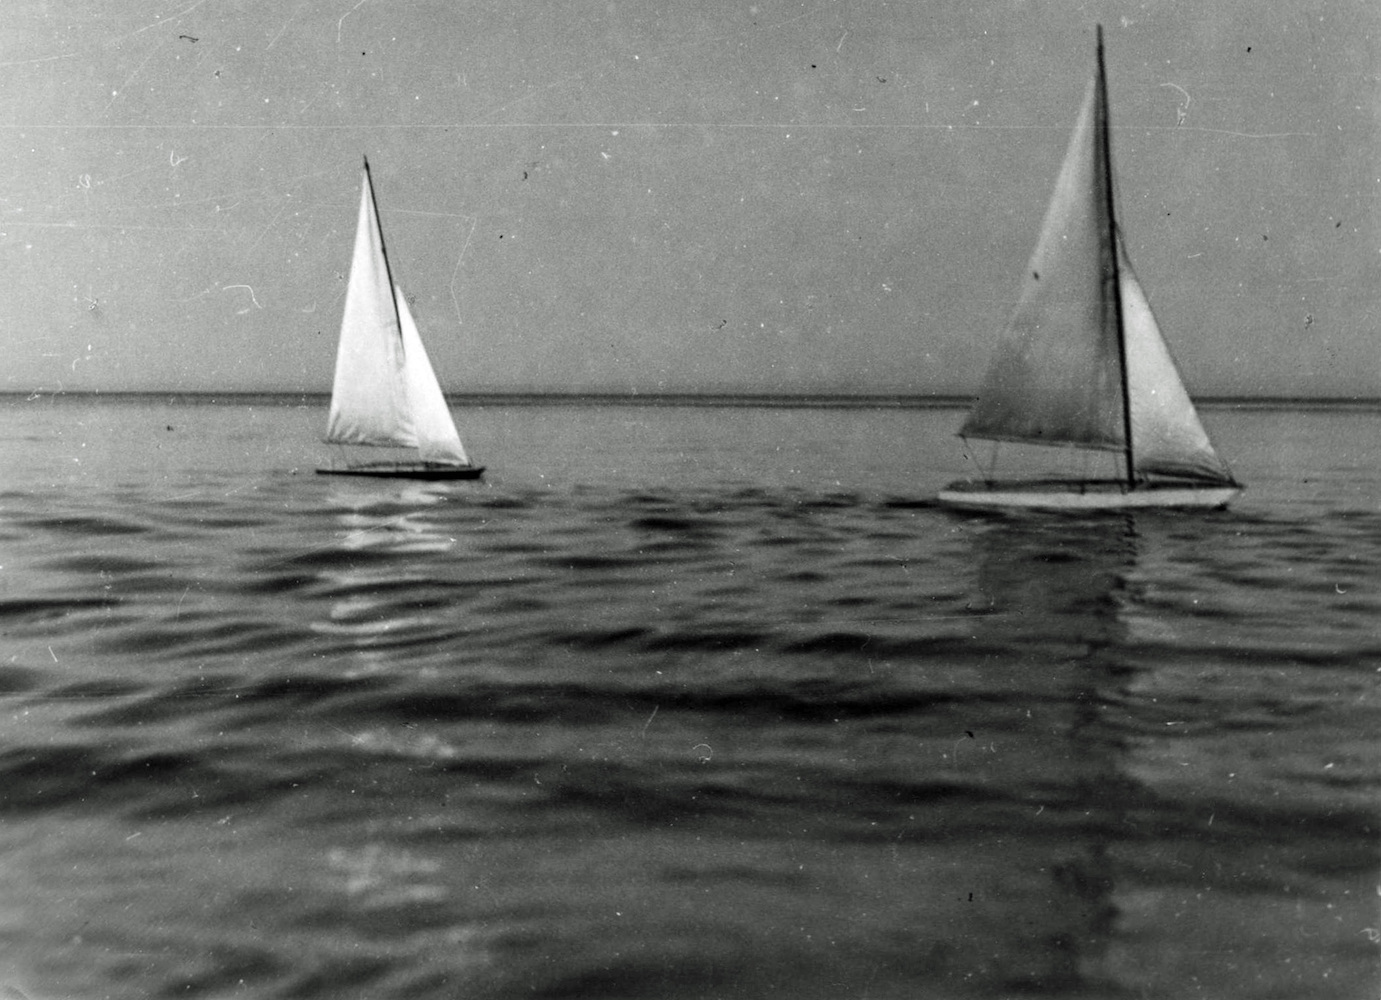 Two model yachts on the calm Rega